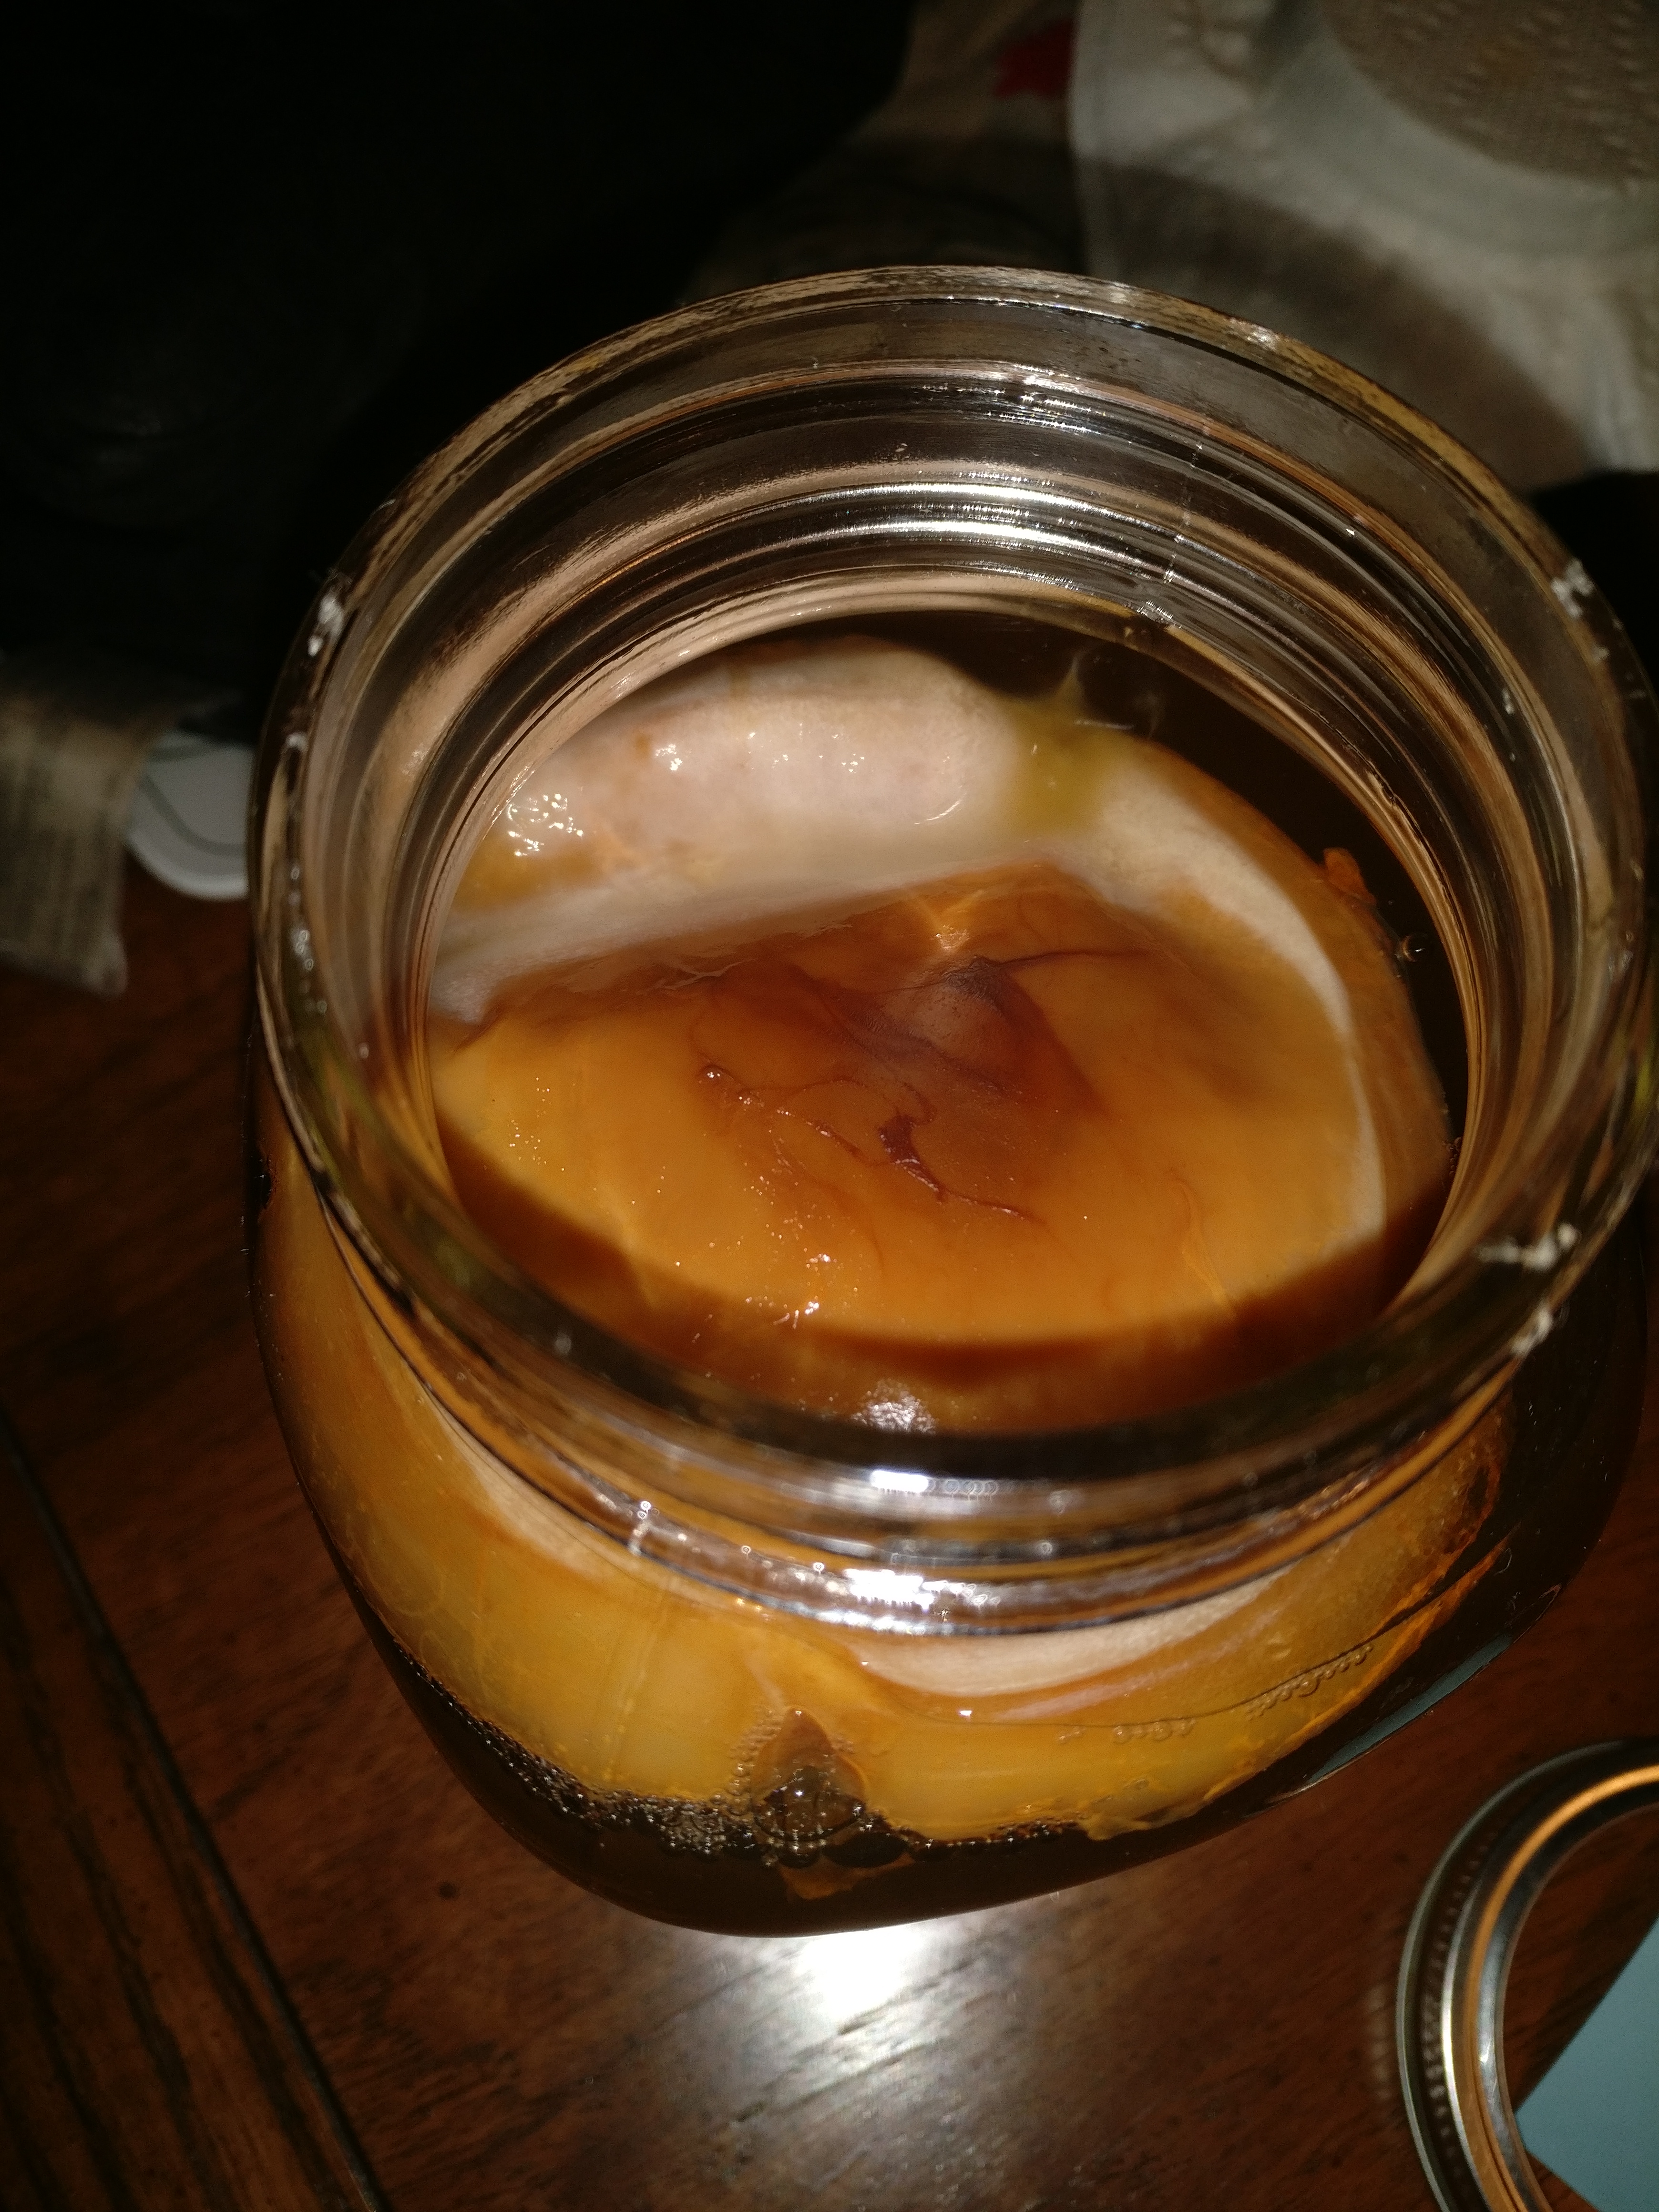 The SCOBY